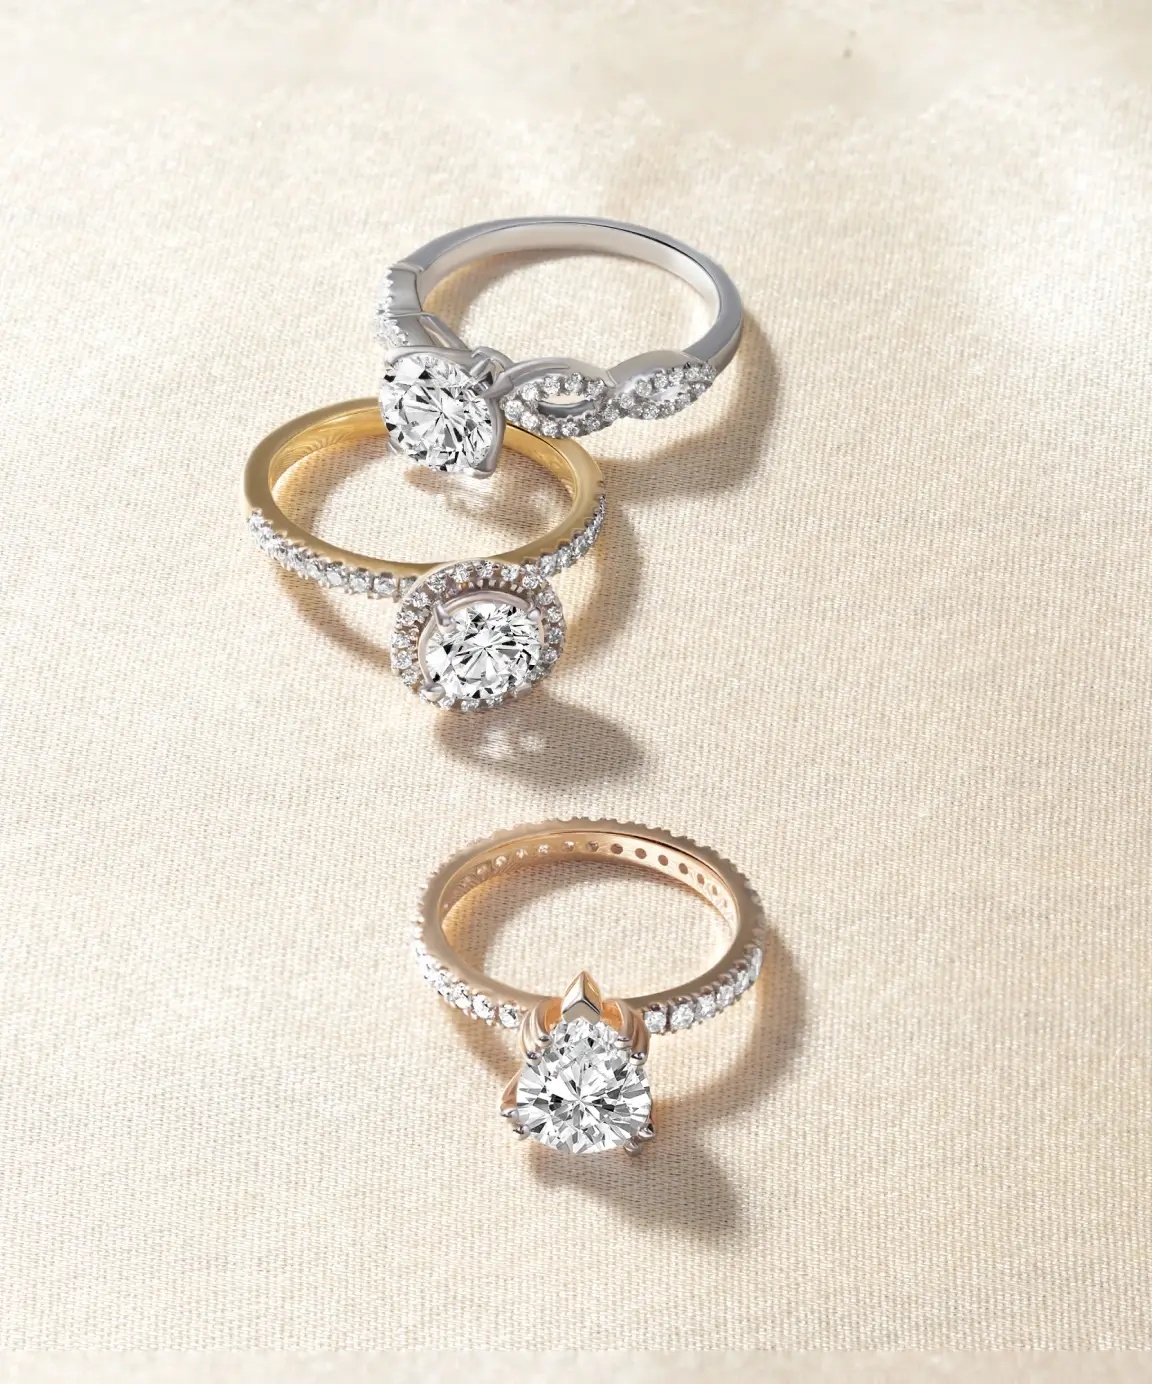 Tips to Figure Out the Engagement Ring She Wants